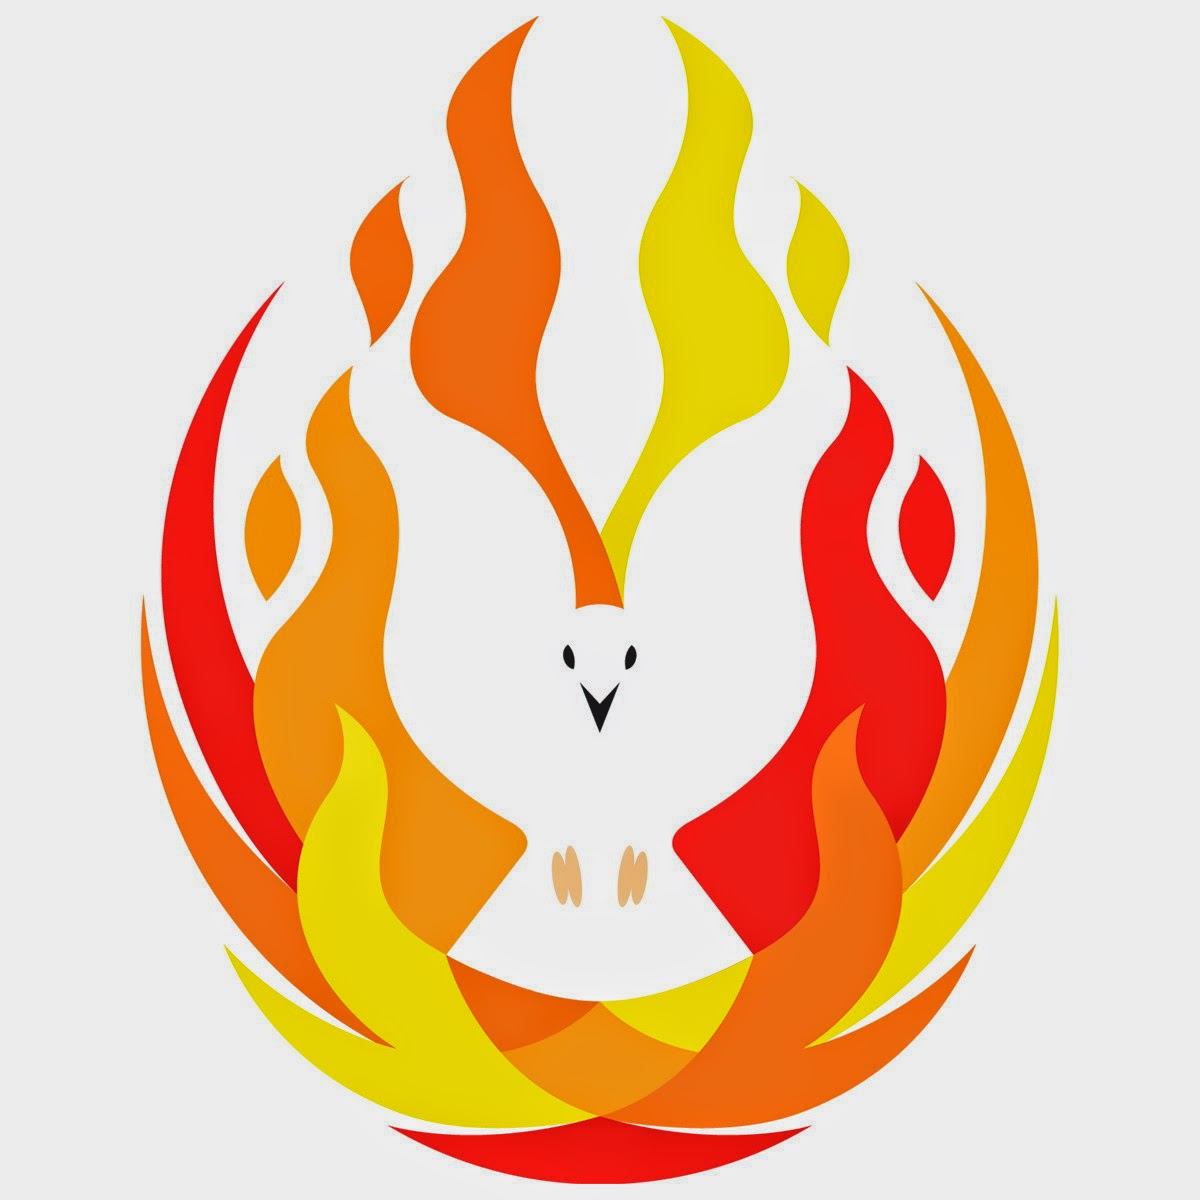 Free download best on. Flames clipart pentecost flame